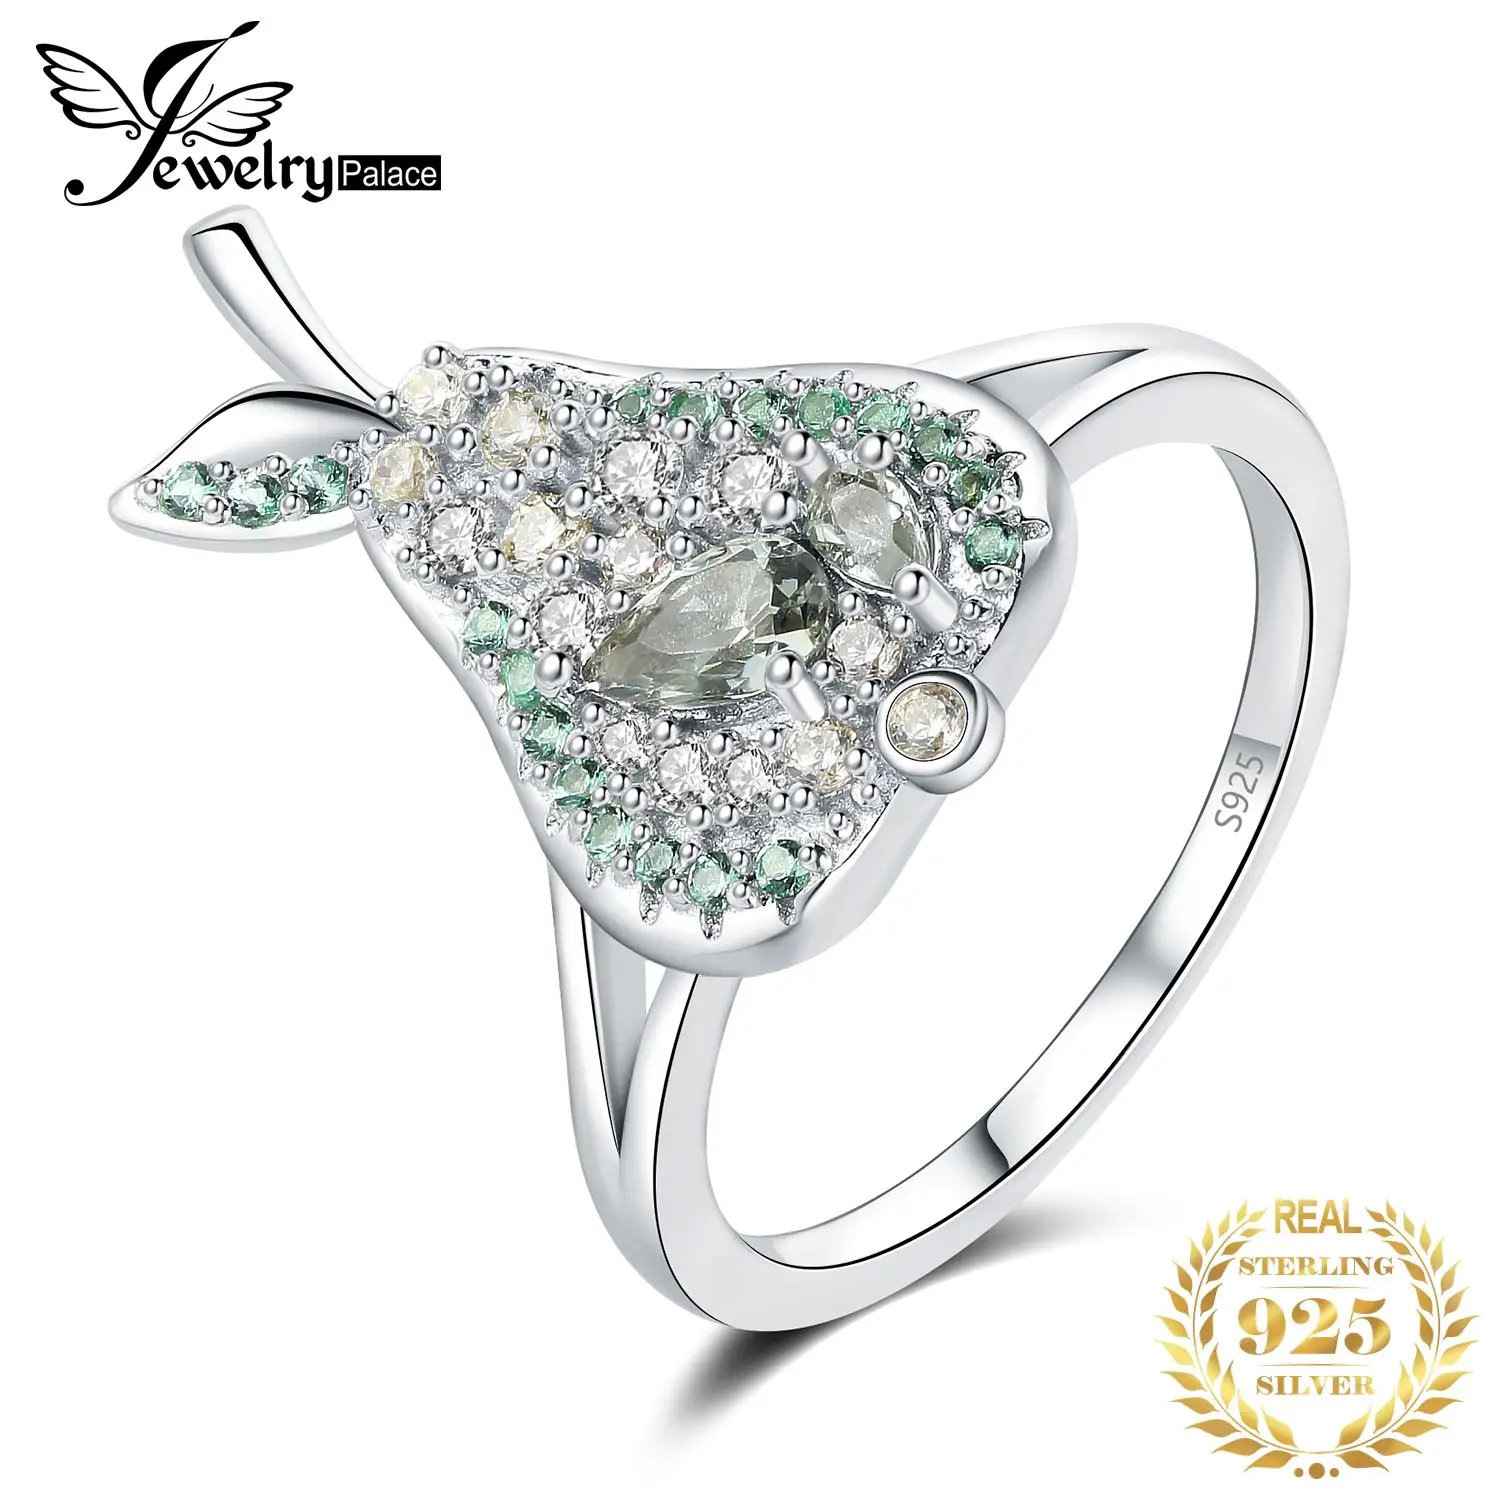 

JewelryPalace New Cute Pear Design Pear Cut Green Created Spinel 925 Sterling Silver Statement Ring for Woman Girl Gemstone Gift